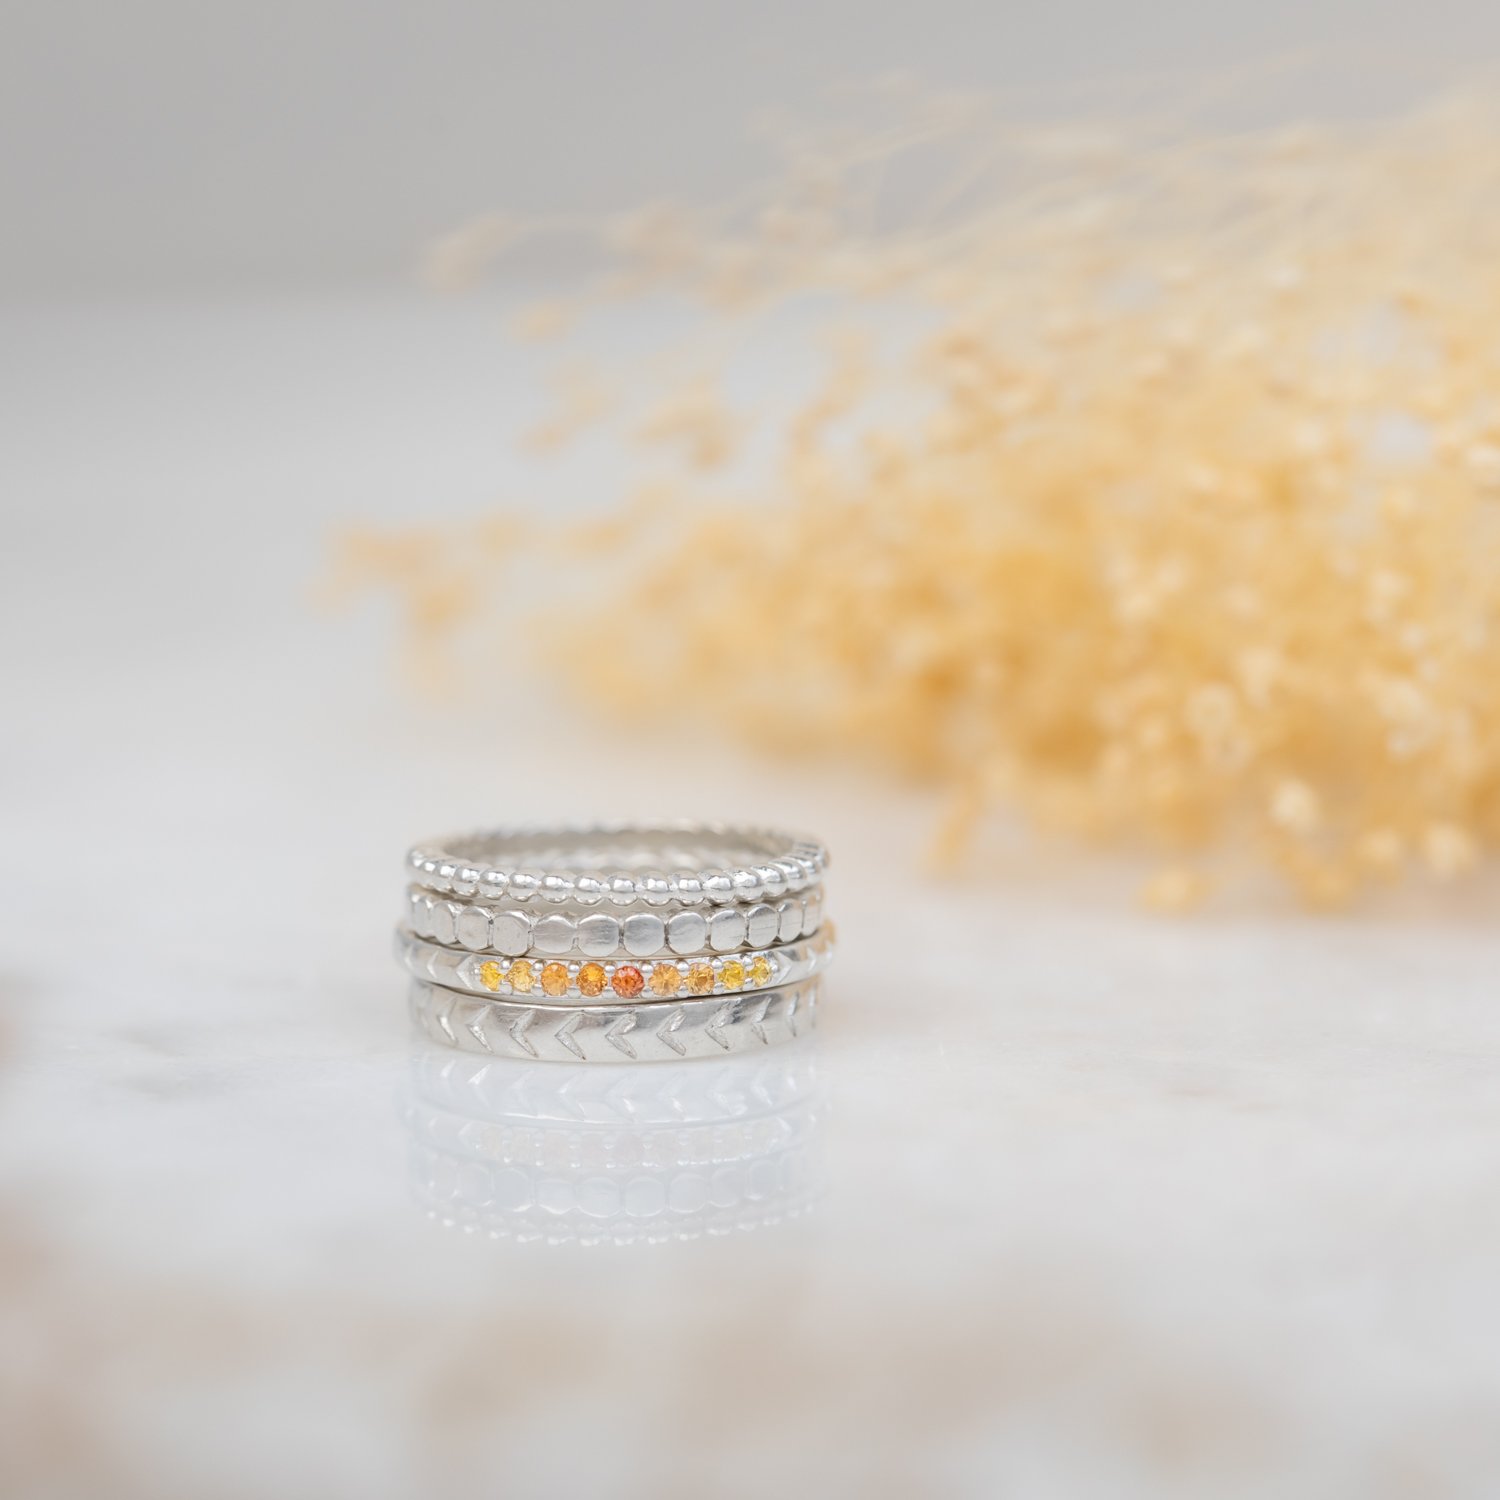 styled-stacking-rings-with-ombre-yellow-sapphire-unicorn.jpg